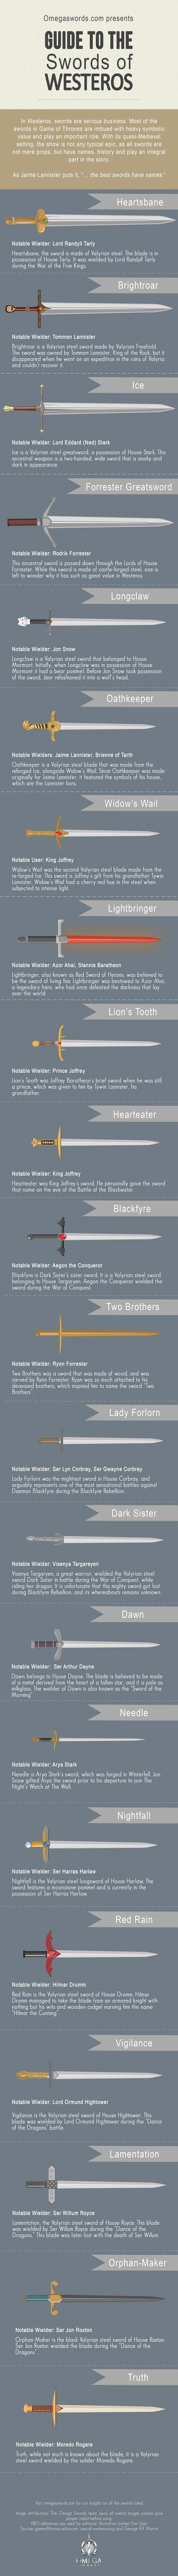 Game of Thrones Sword Guide